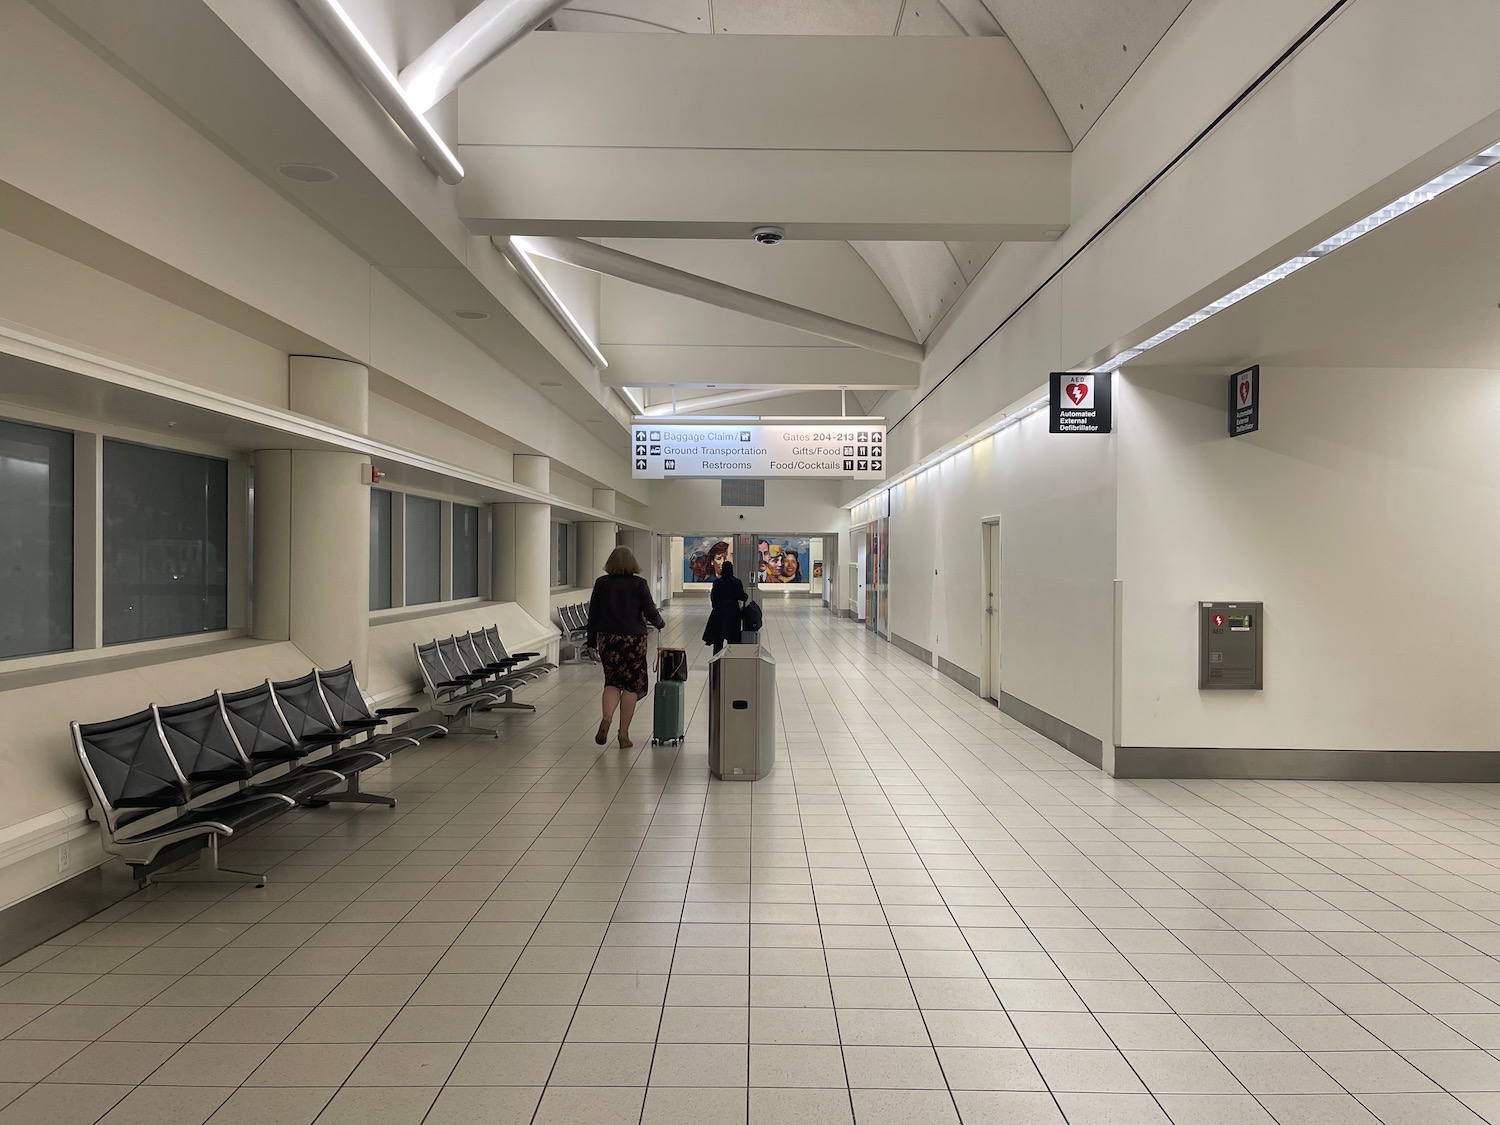 people in a white hallway with benches and people walking